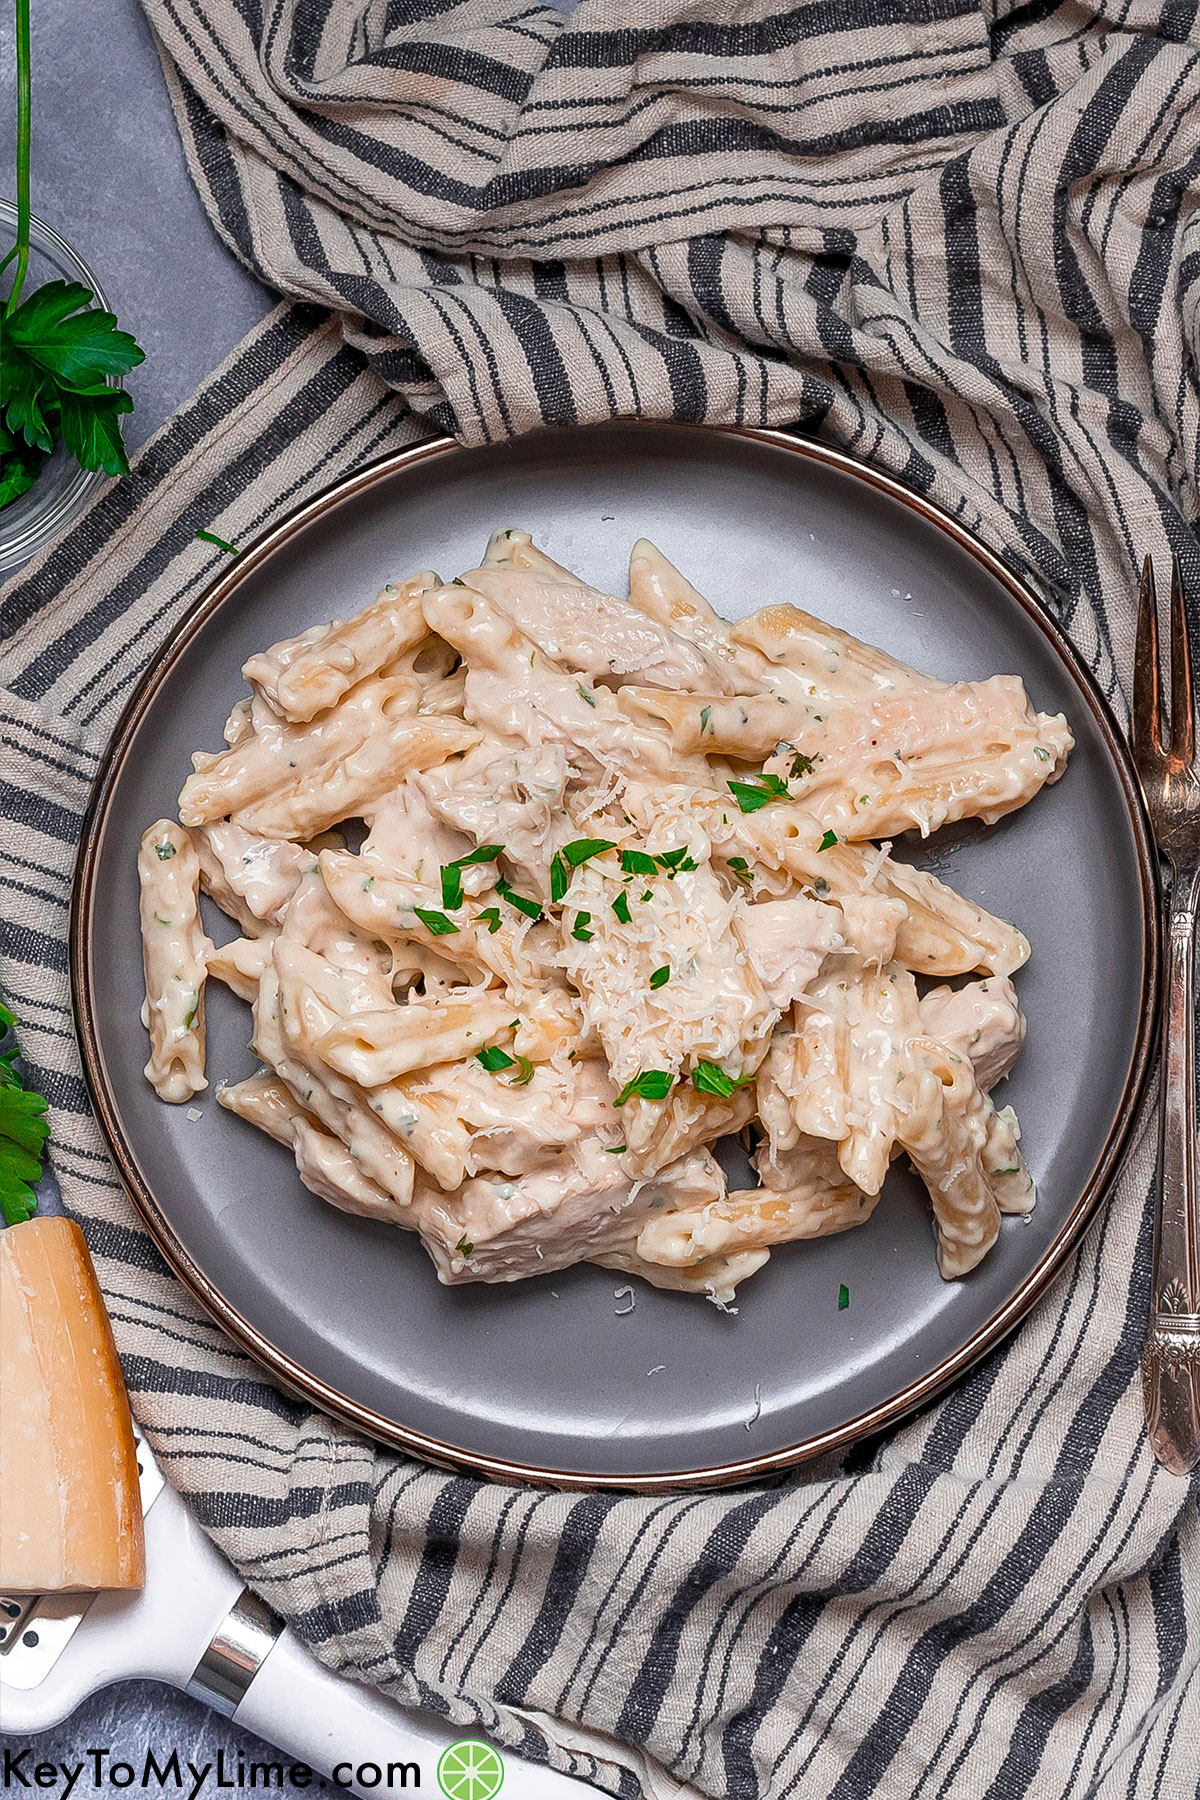 A single serving of creamy garlic pasta with chicken throughout.